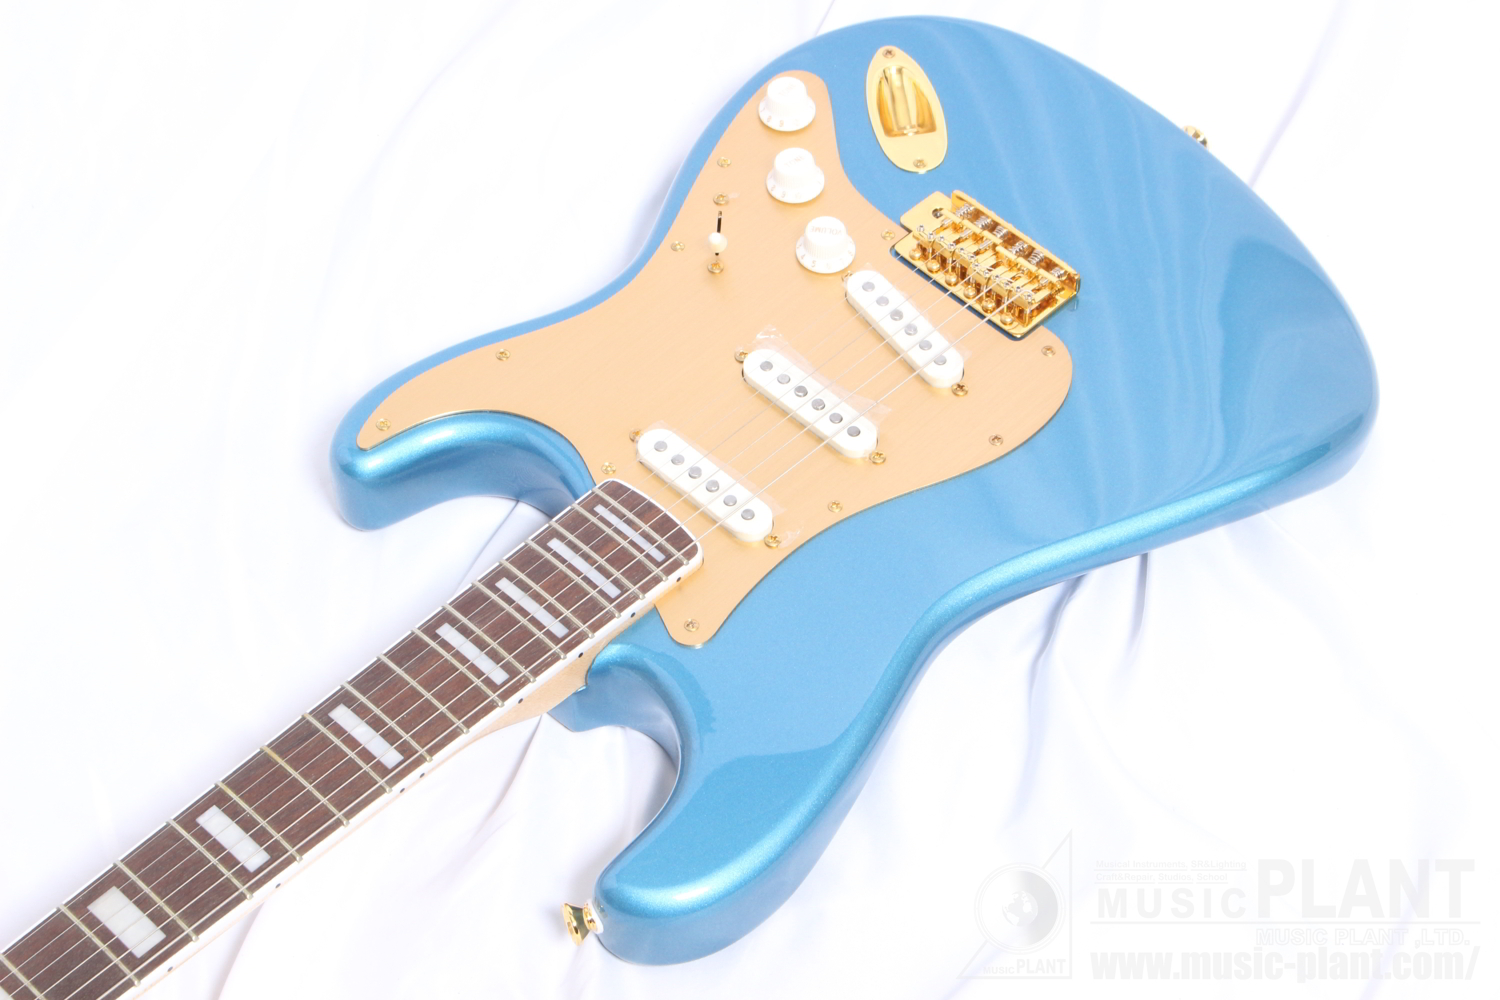 40th Anniversary Stratocaster®, Gold Edition, Laurel Fingerboard, Gold Anodized Pickguard, Lake Placid Blue追加画像